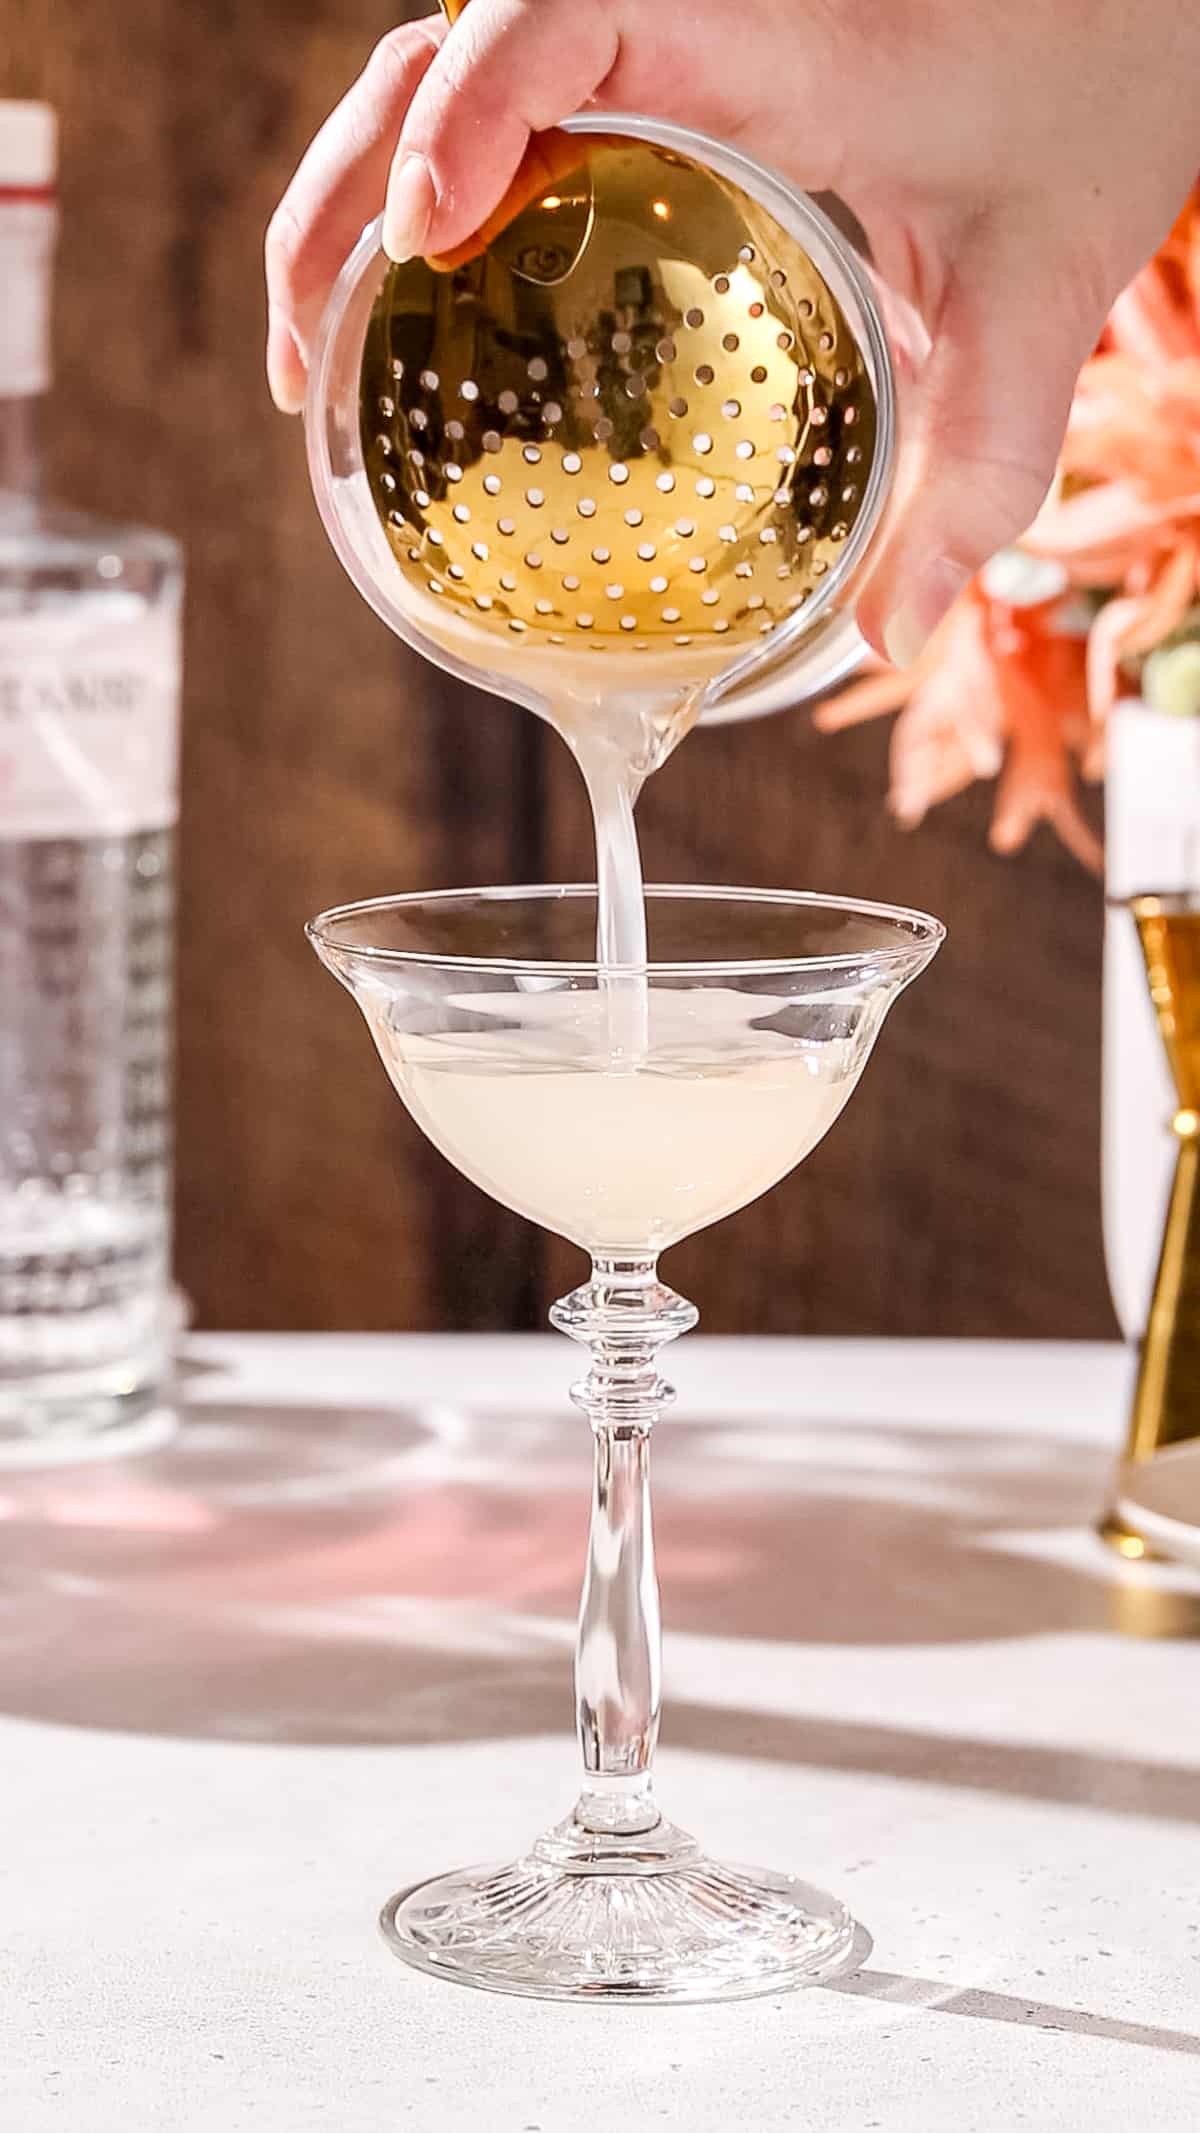 Hand straining a cocktail into a fancy coupe glass.